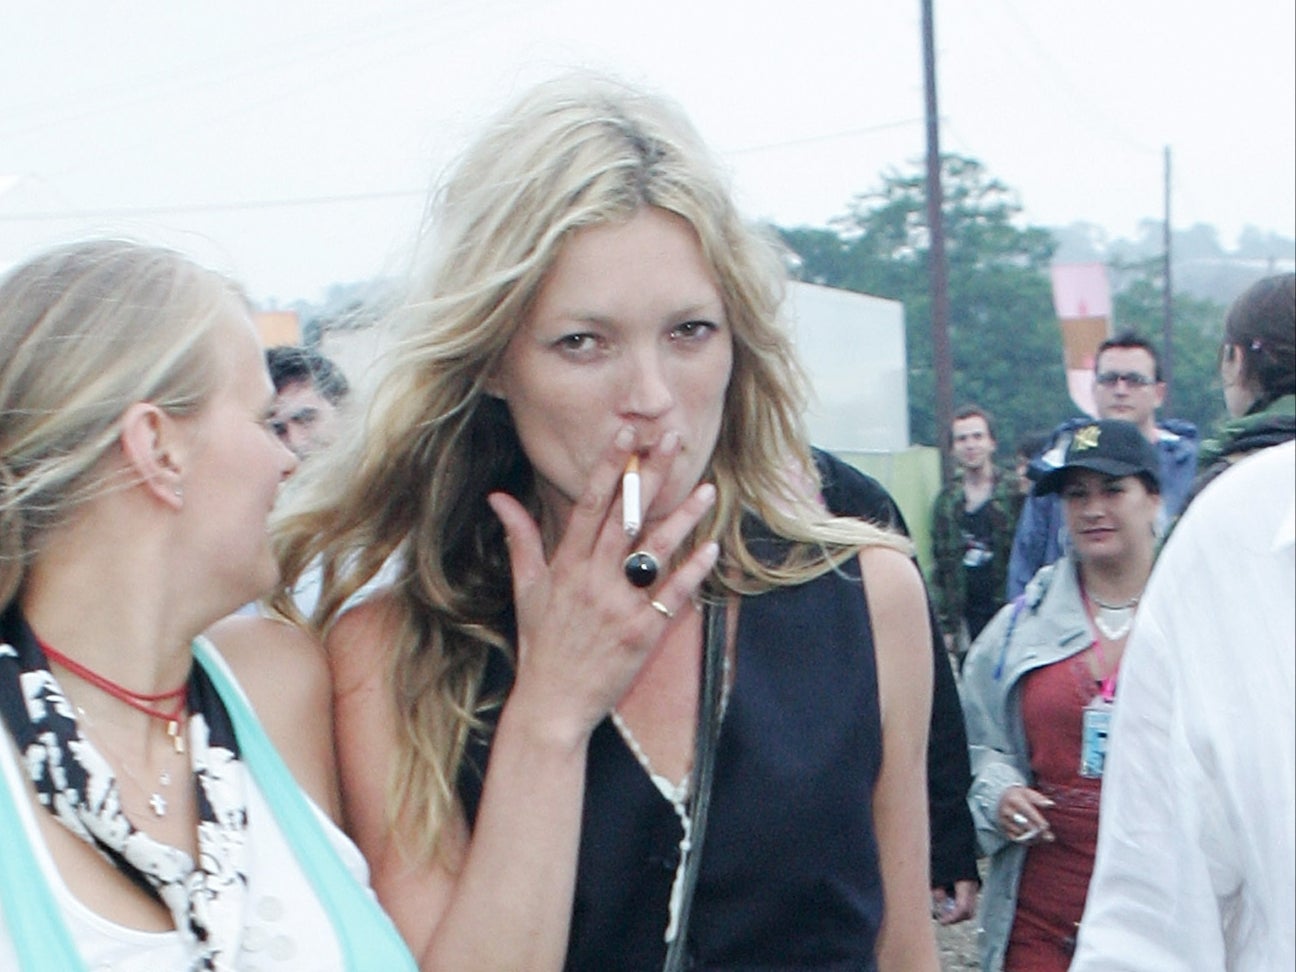 Kate Moss, once rarely seen without a cigarette in hand, now rarely smokes